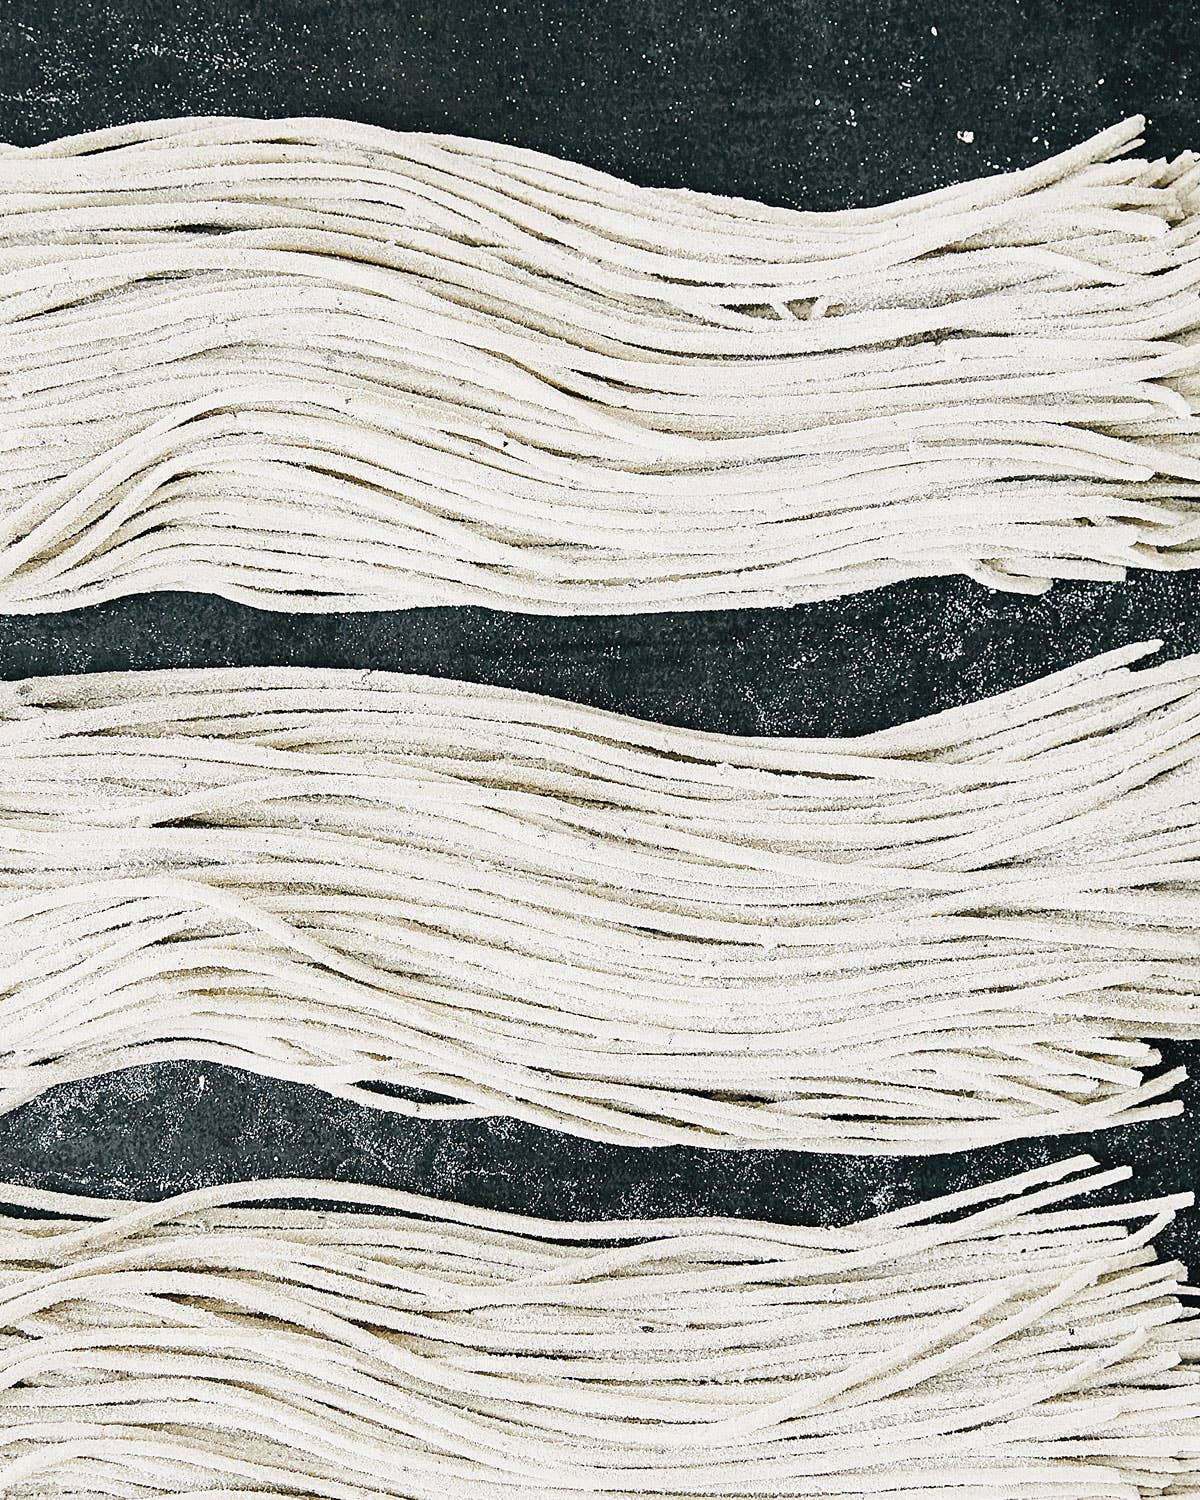 The Art of Homemade Soba Noodles